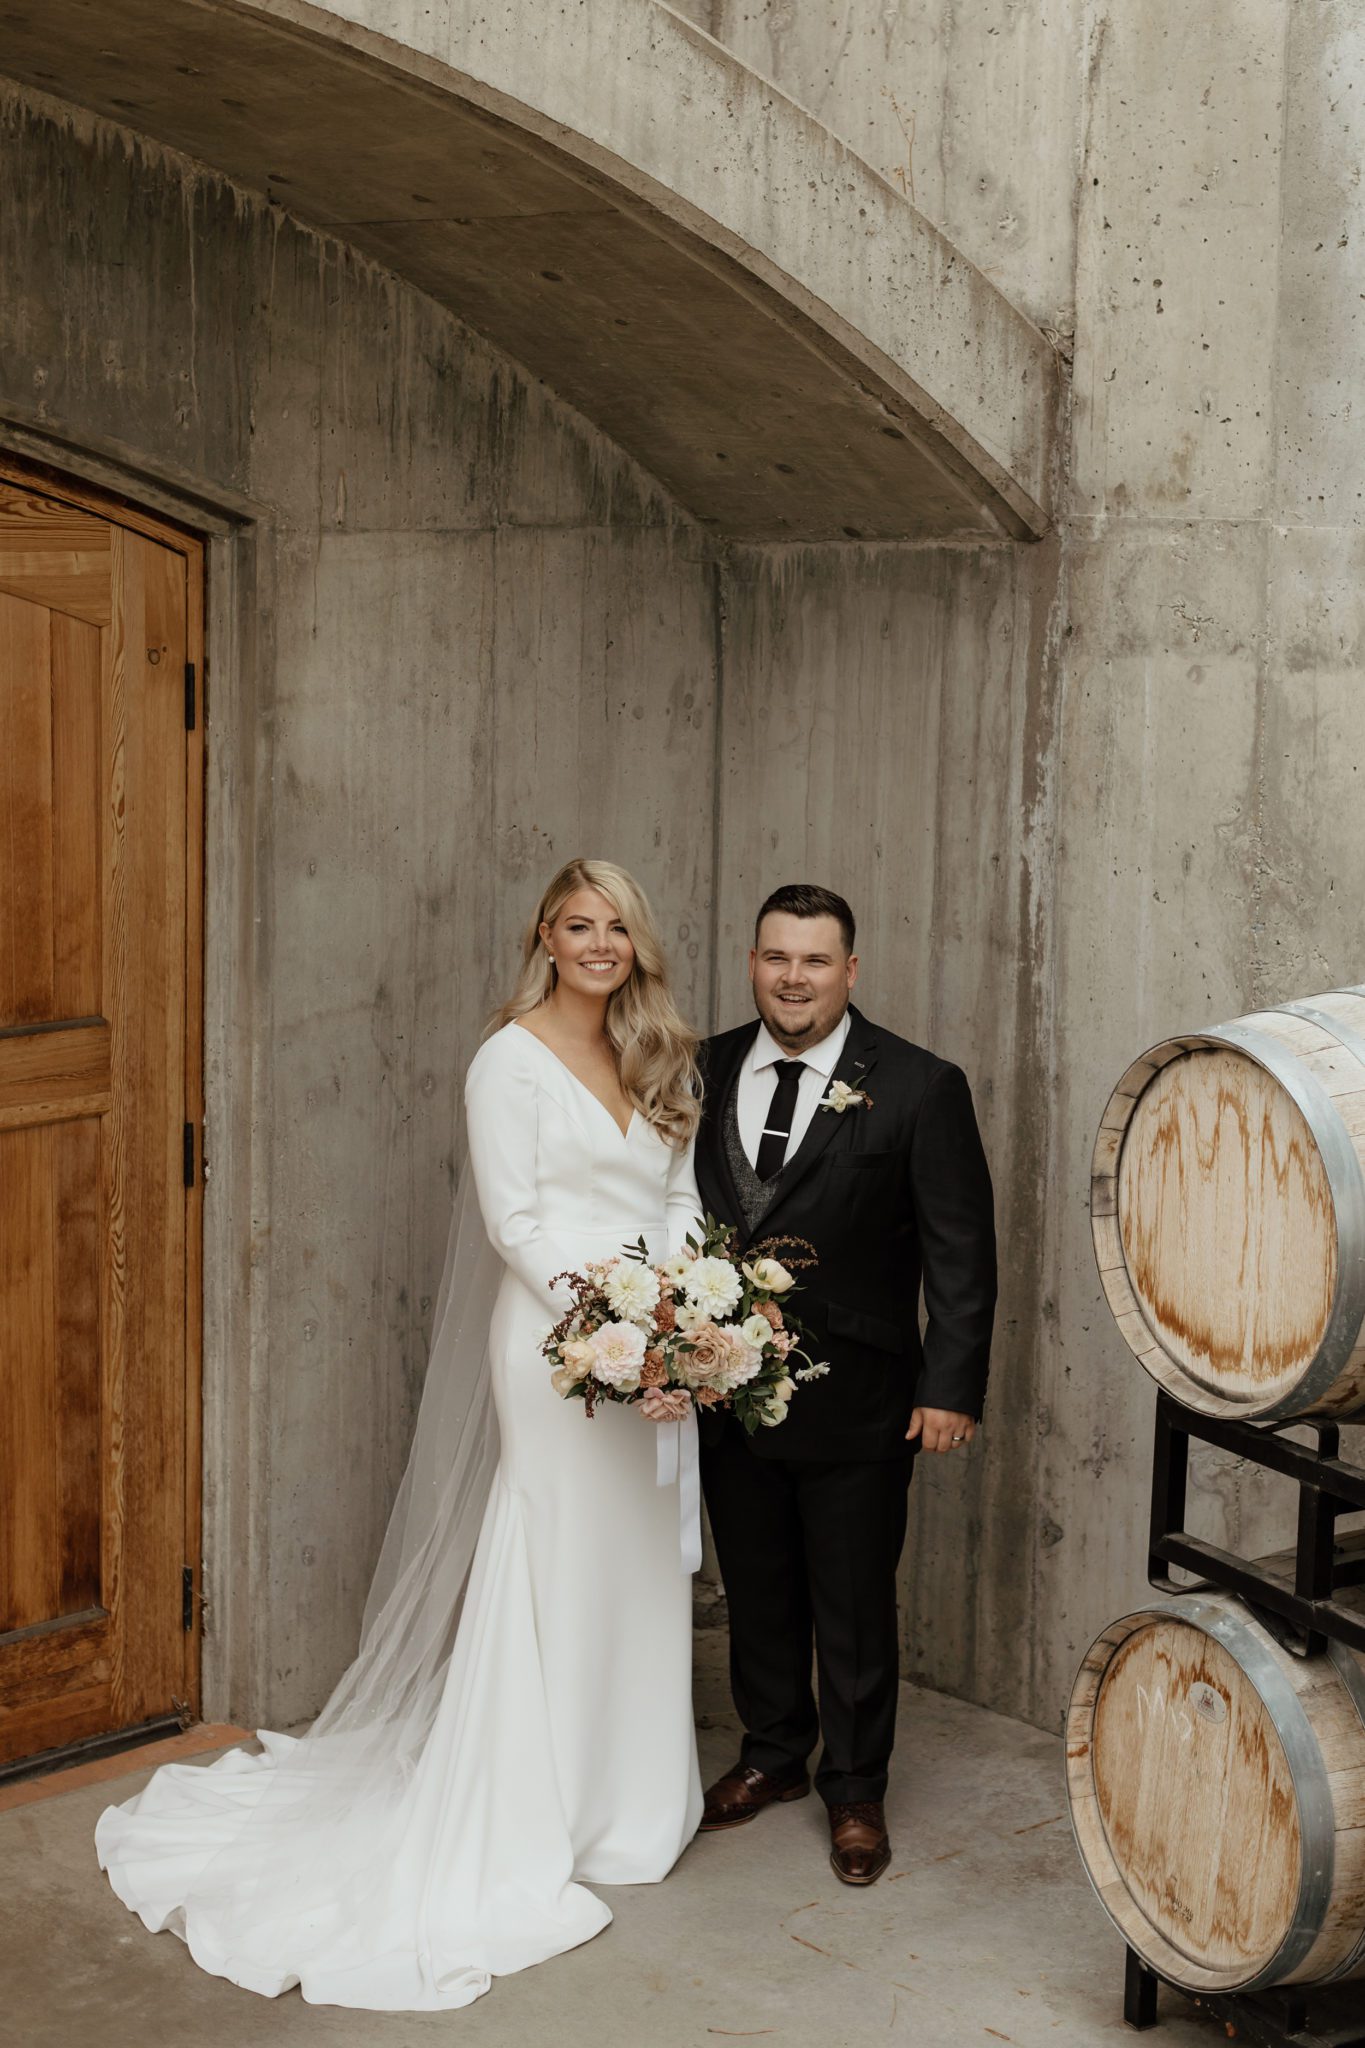 Classically styled bride and groom pose next to wine barrels on their wedding day